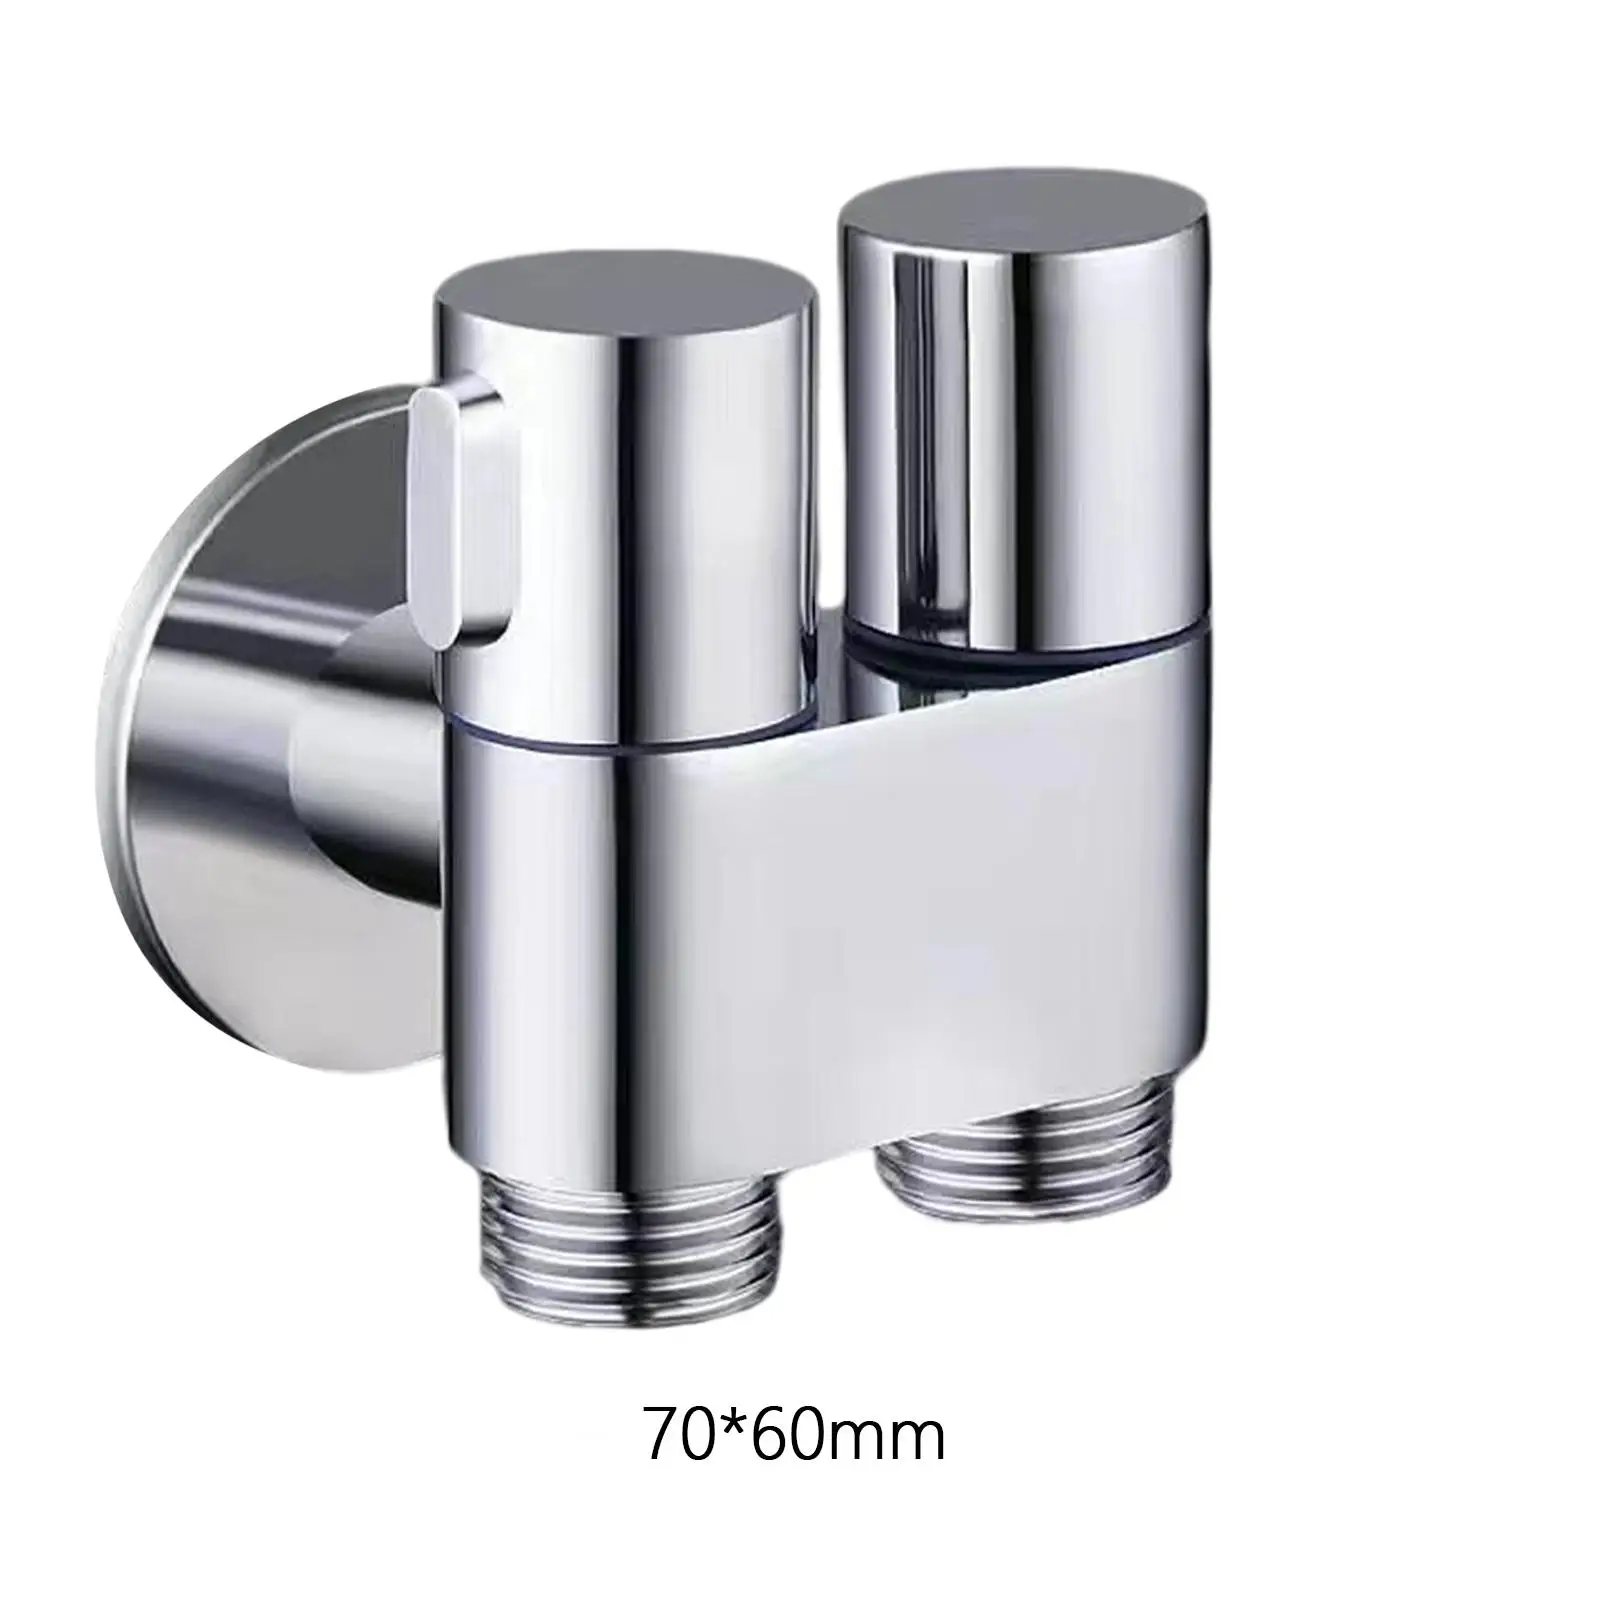 Three Way Filling Angle Valve Accessories for Kitchen Water Cleaning Sprayer